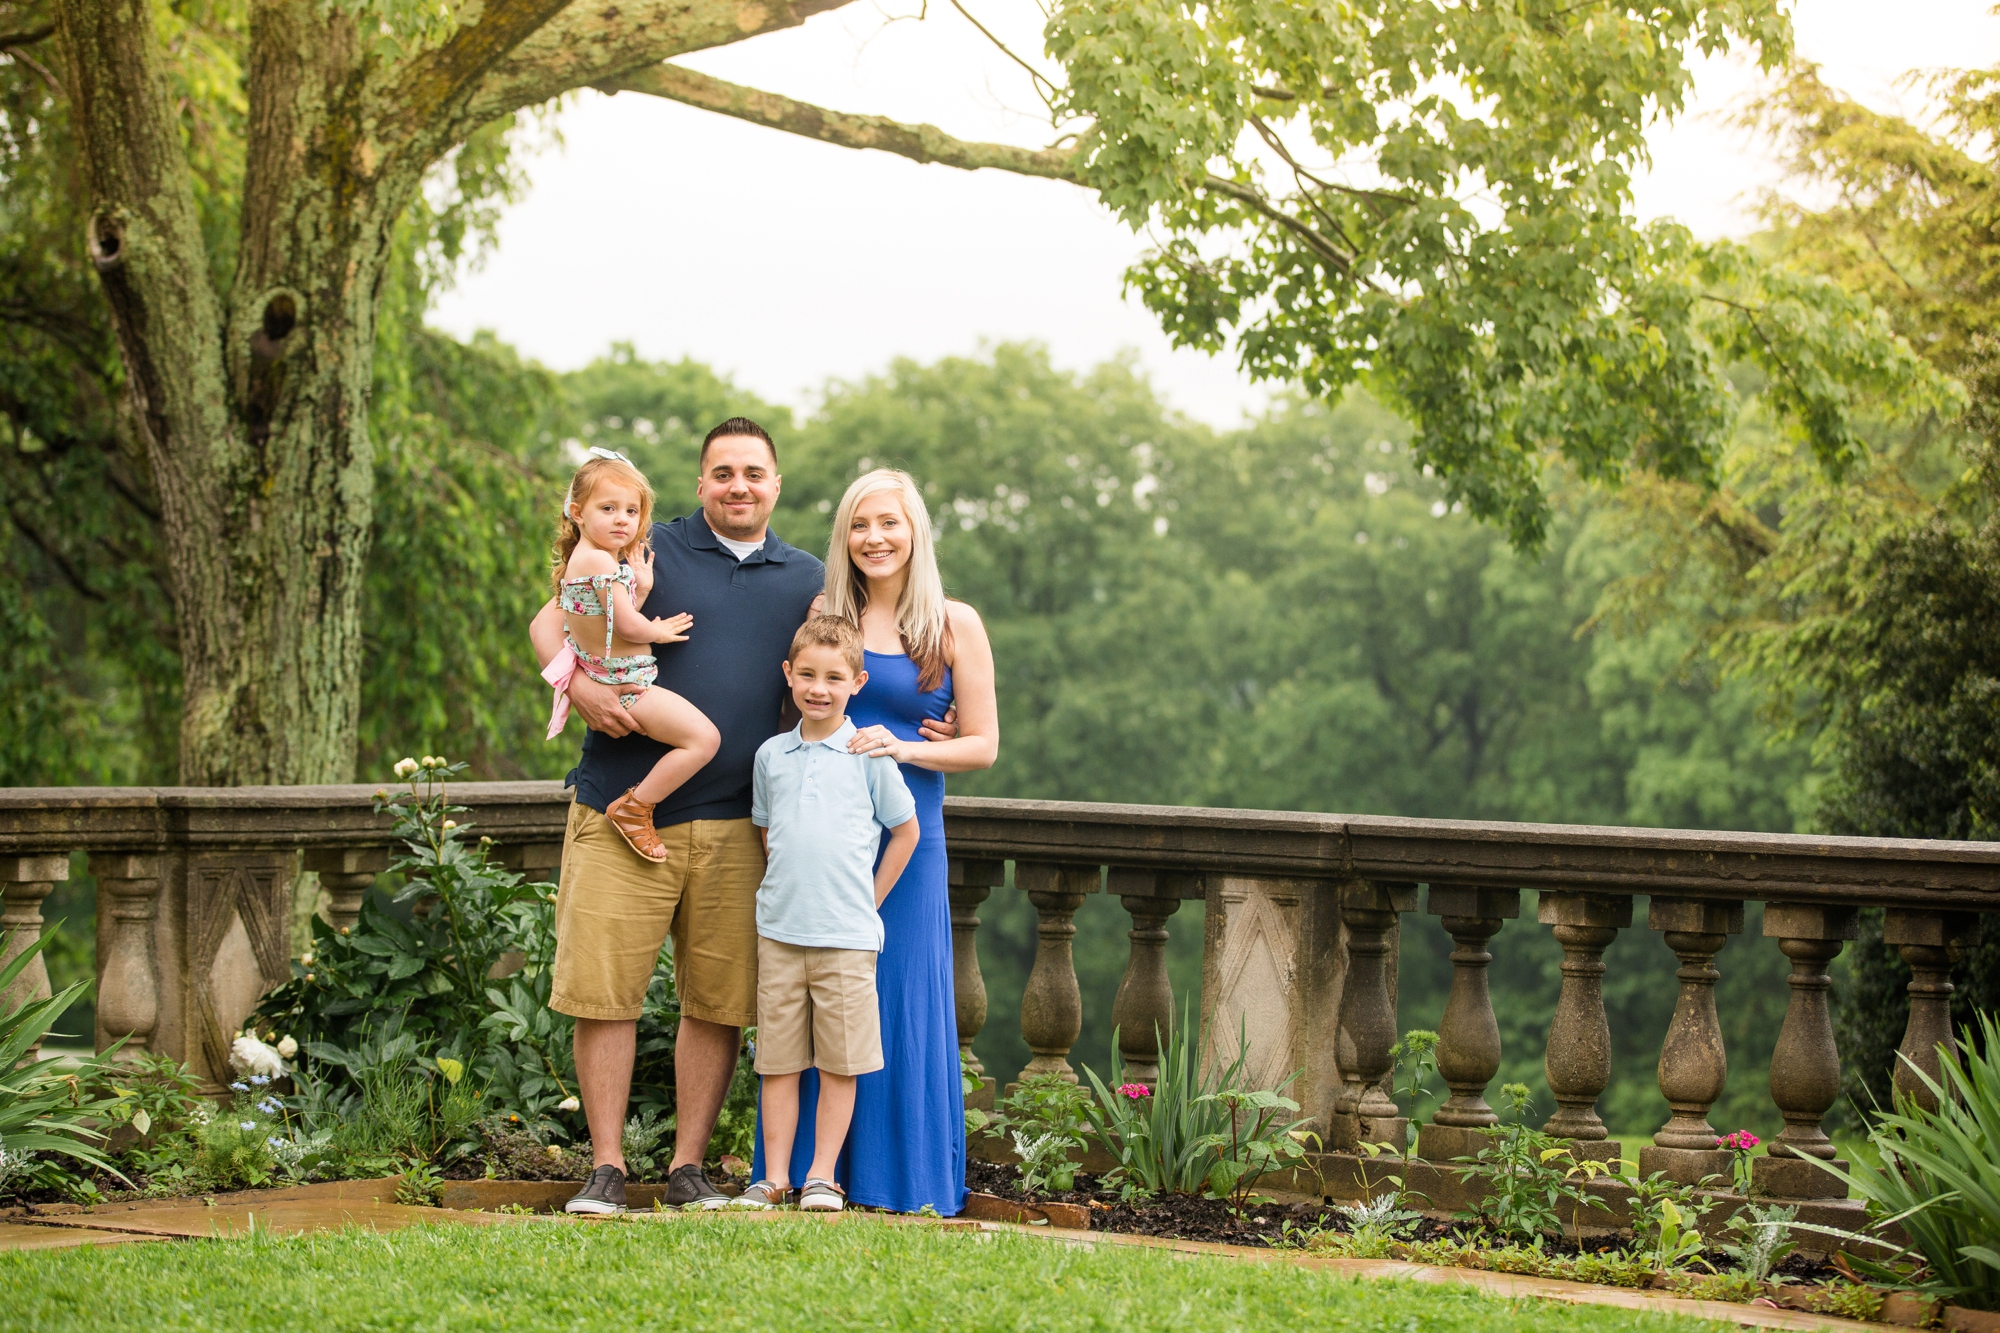 hartwood acres family photographer, pittsburgh family photographer, hartwood acres mansion pictures, hartwood family photographer, cranberry township family photographer